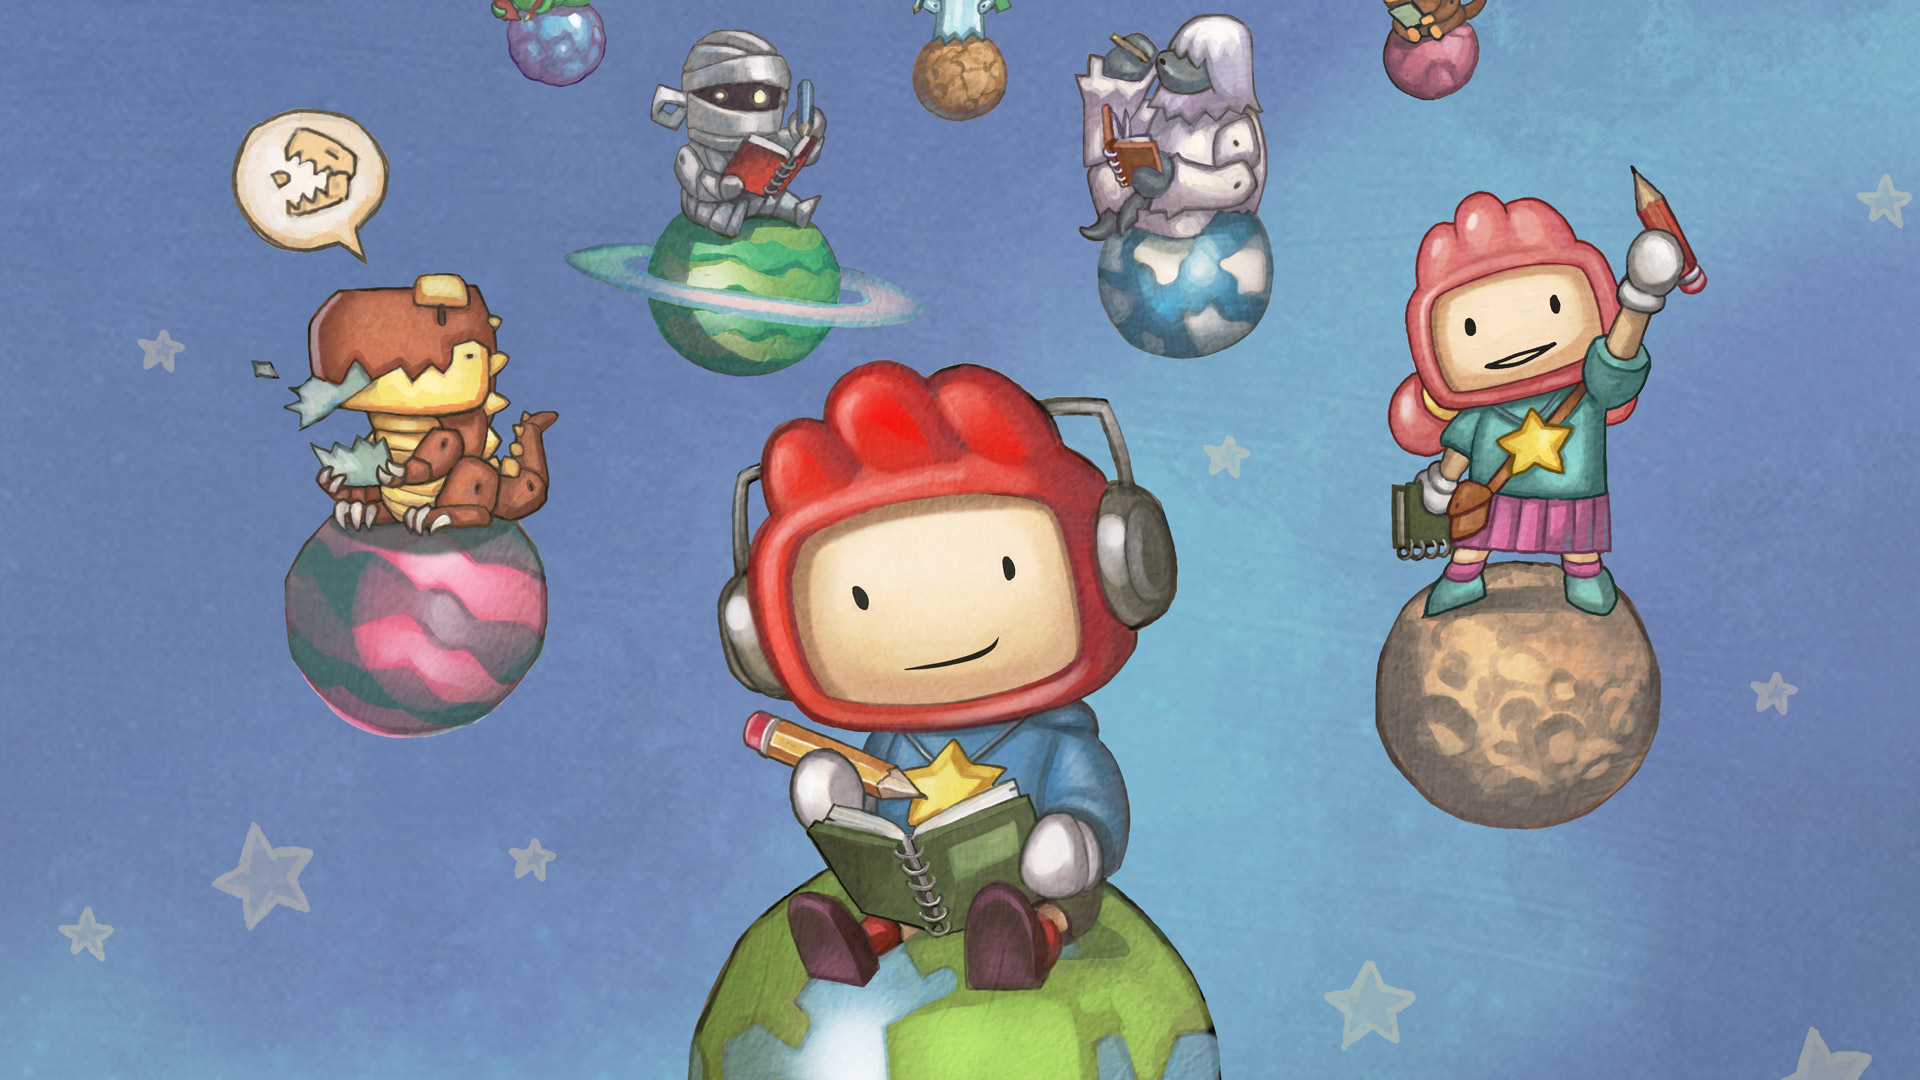 Scribblenauts Unlimited HD Wallpaper Background Image